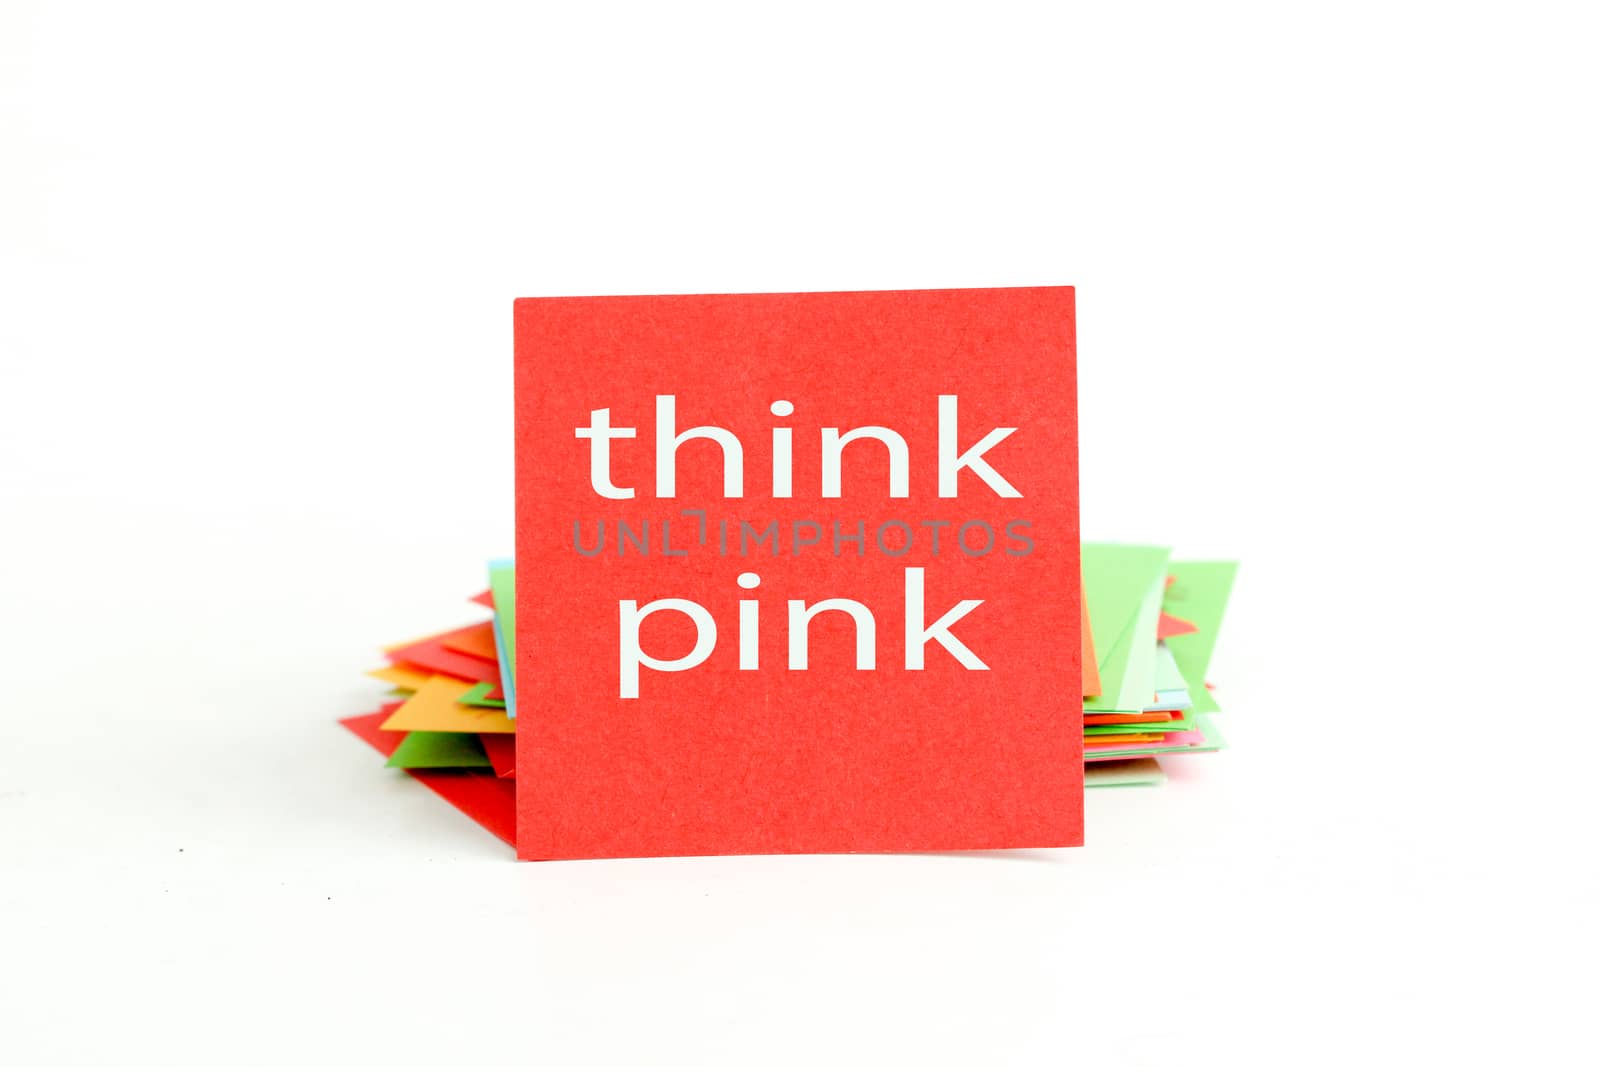 picture of a red note paper with text think pink